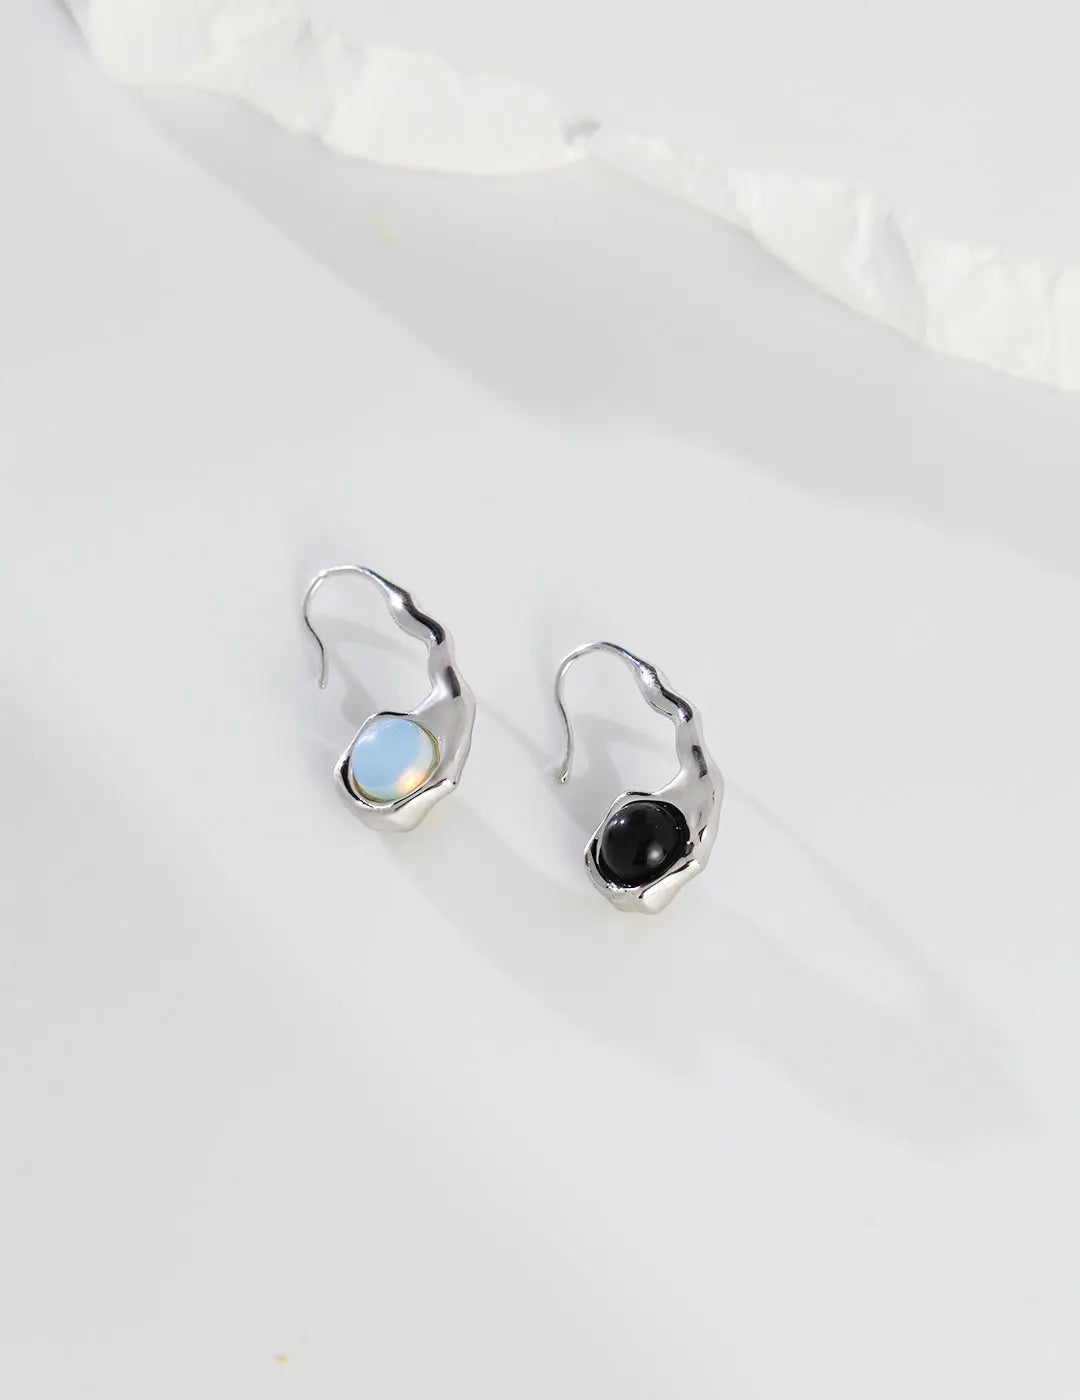 S925 silver earrings with Opal stone Agate Stone 